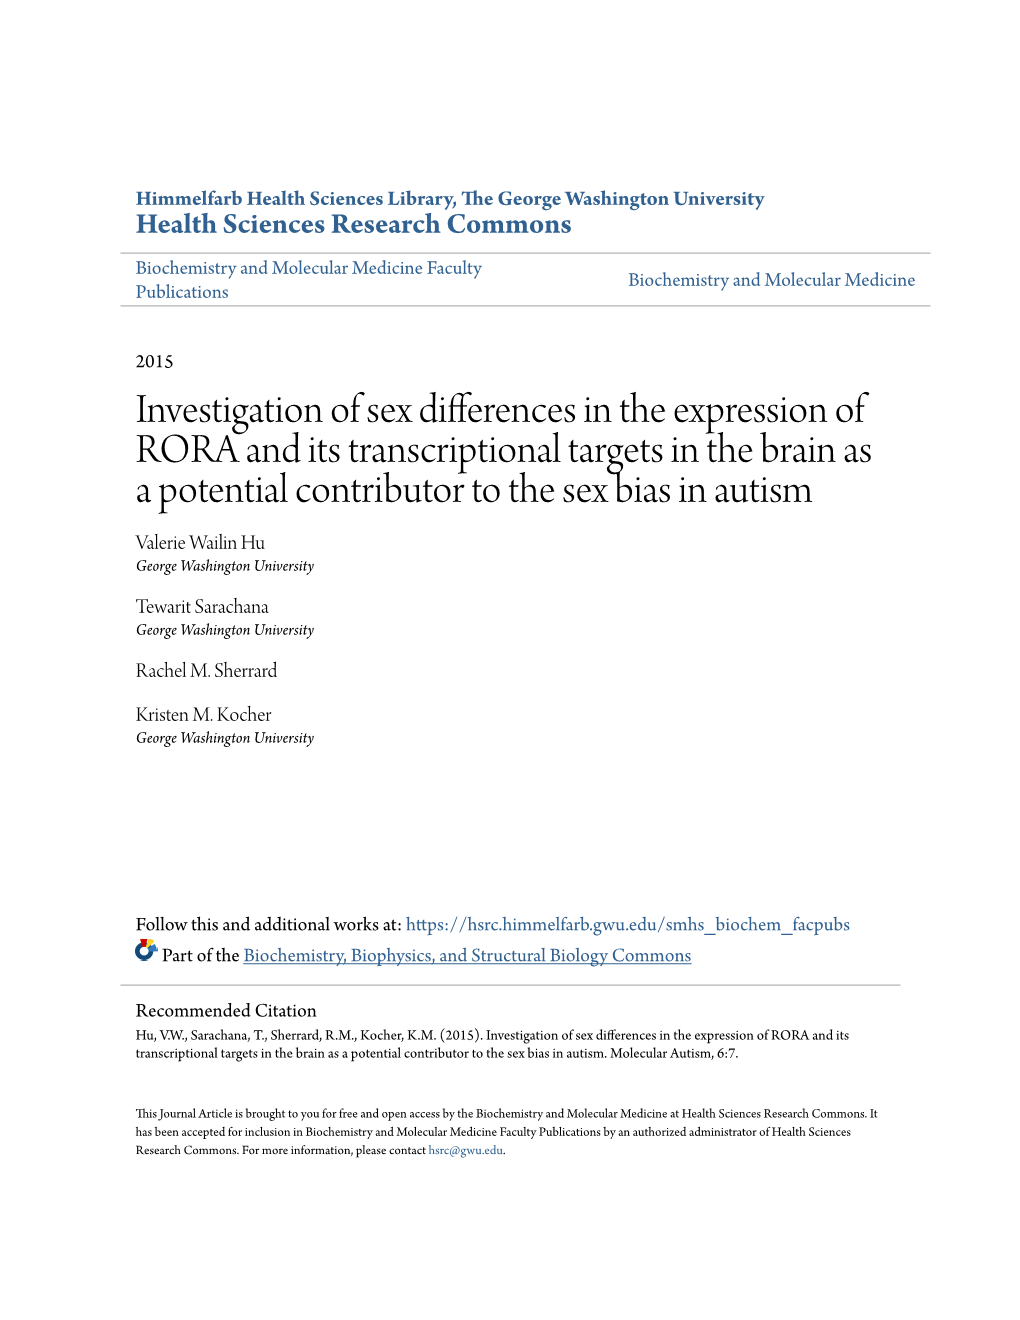 Investigation of Sex Differences in the Expression of RORA and Its Transcriptional Targets in the Brain As a Potential Contributor to the Sex Bias in Autism Hu Et Al